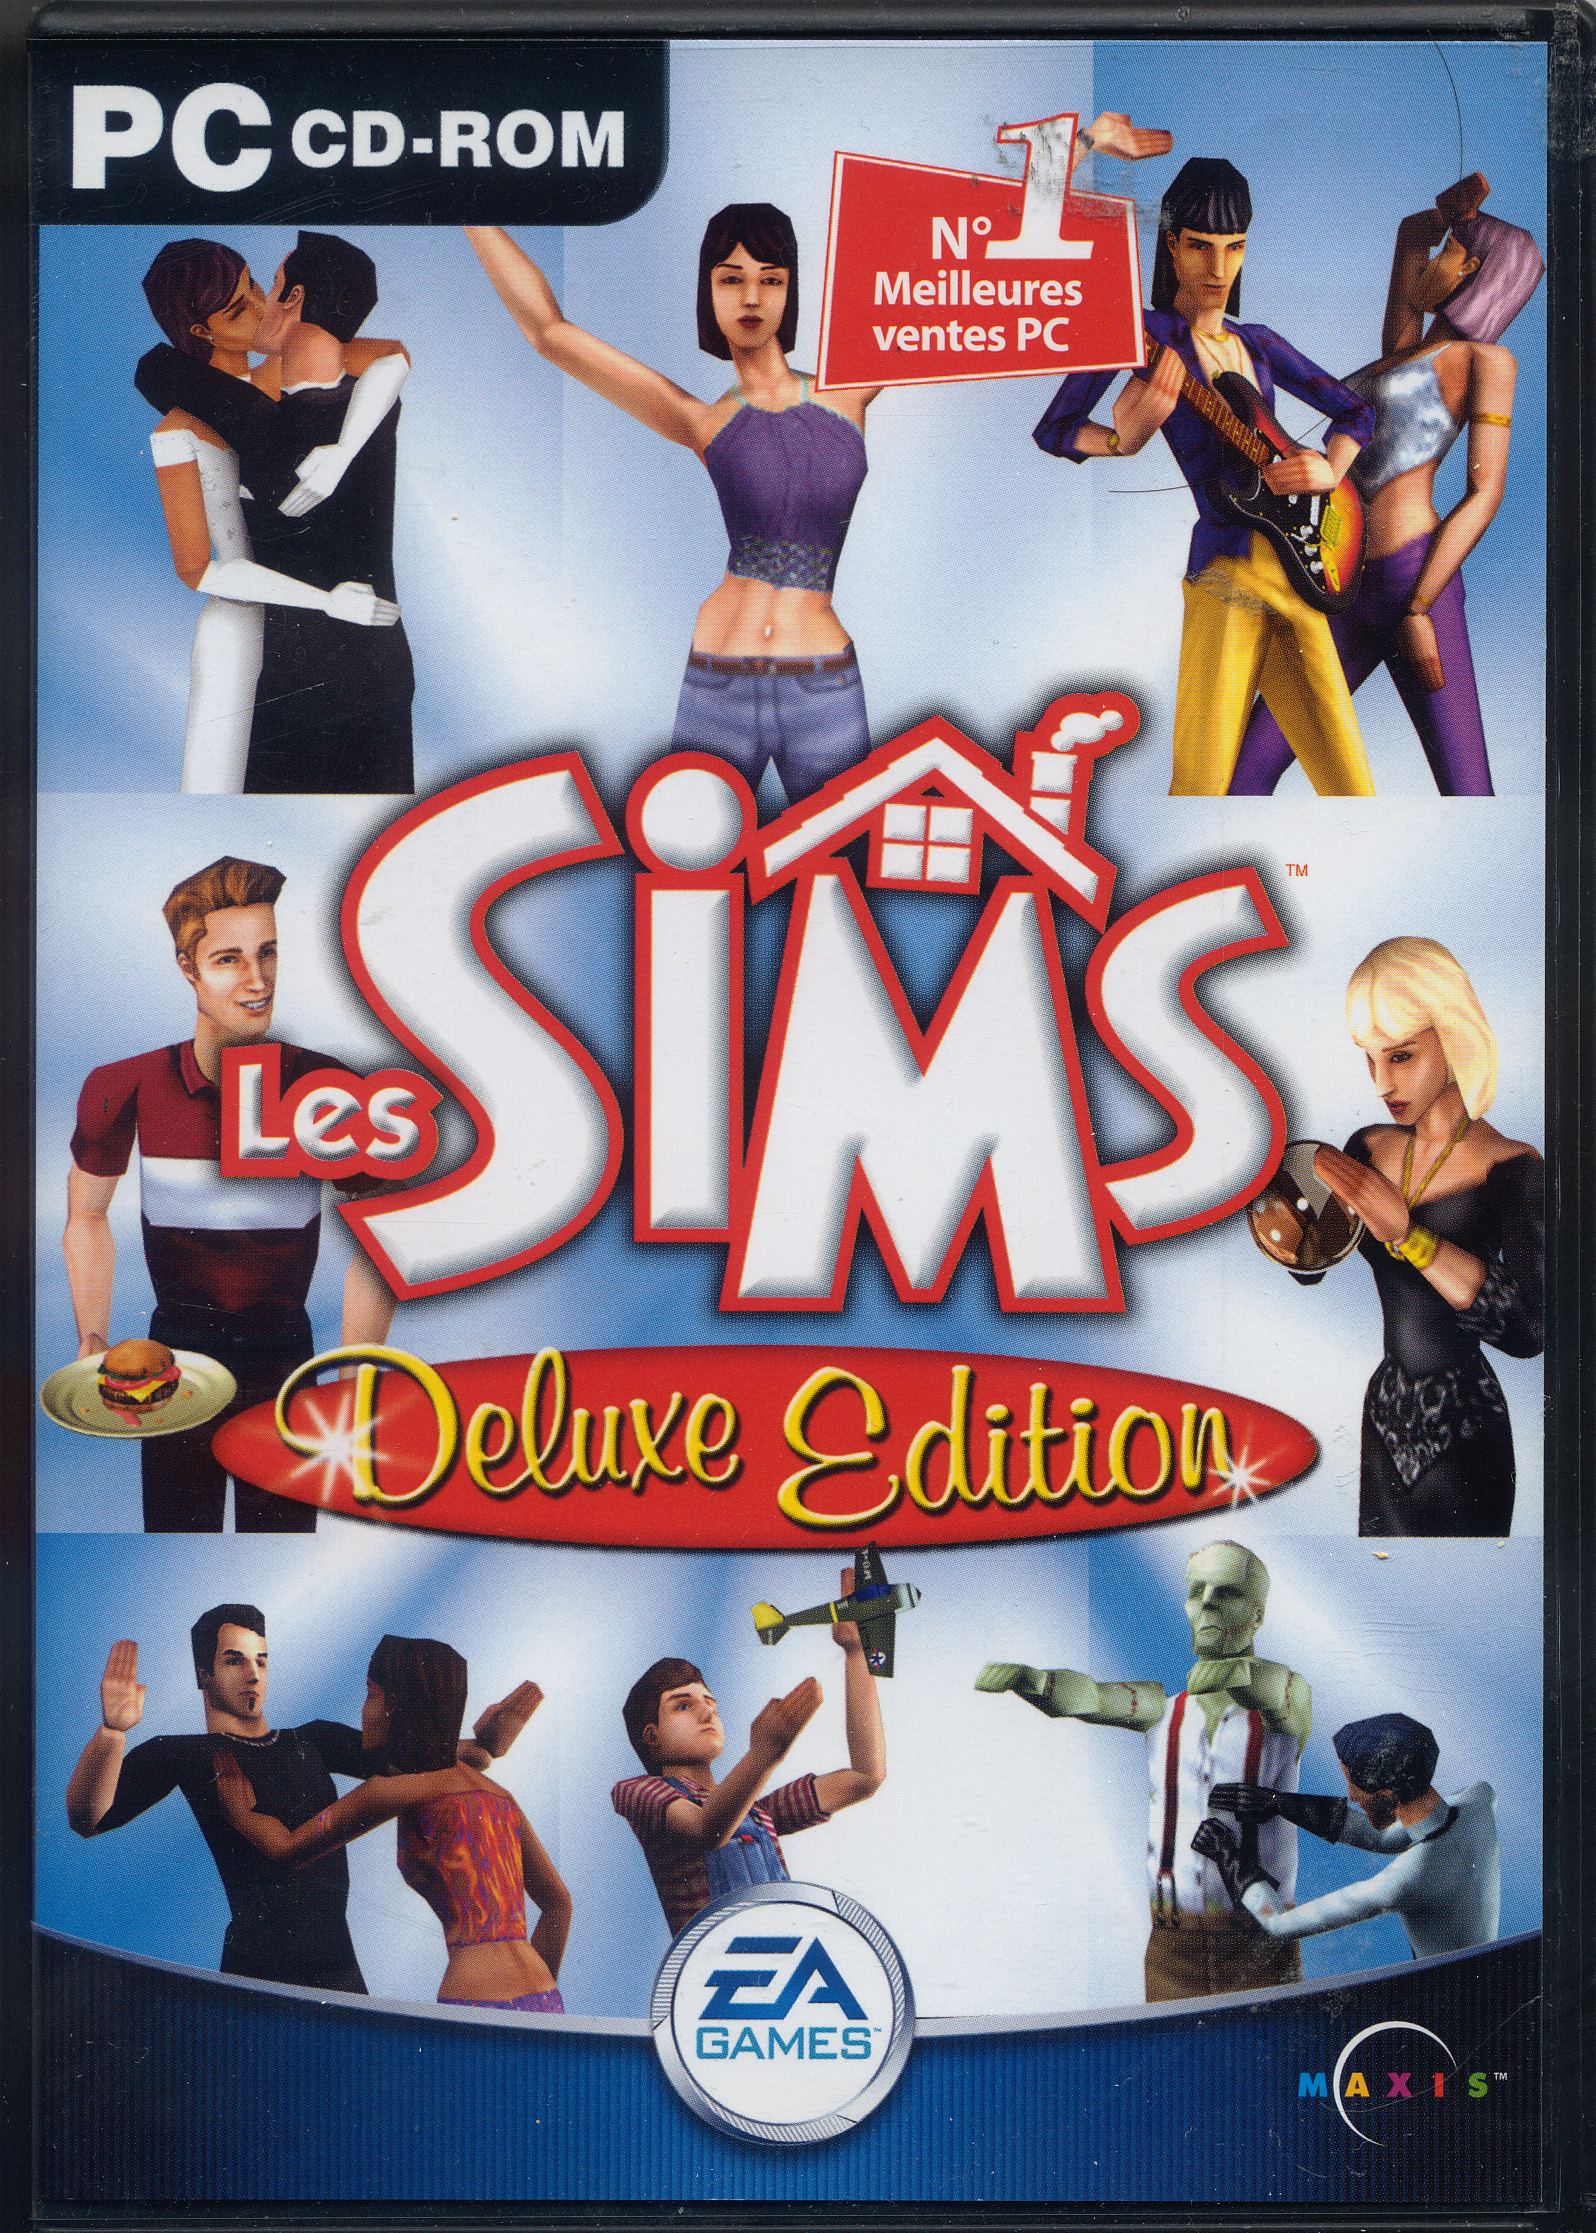 The Sims Deluxe Edition Multilingual (Win95)(2002) : Free Download, Borrow,  and Streaming : Internet Archive